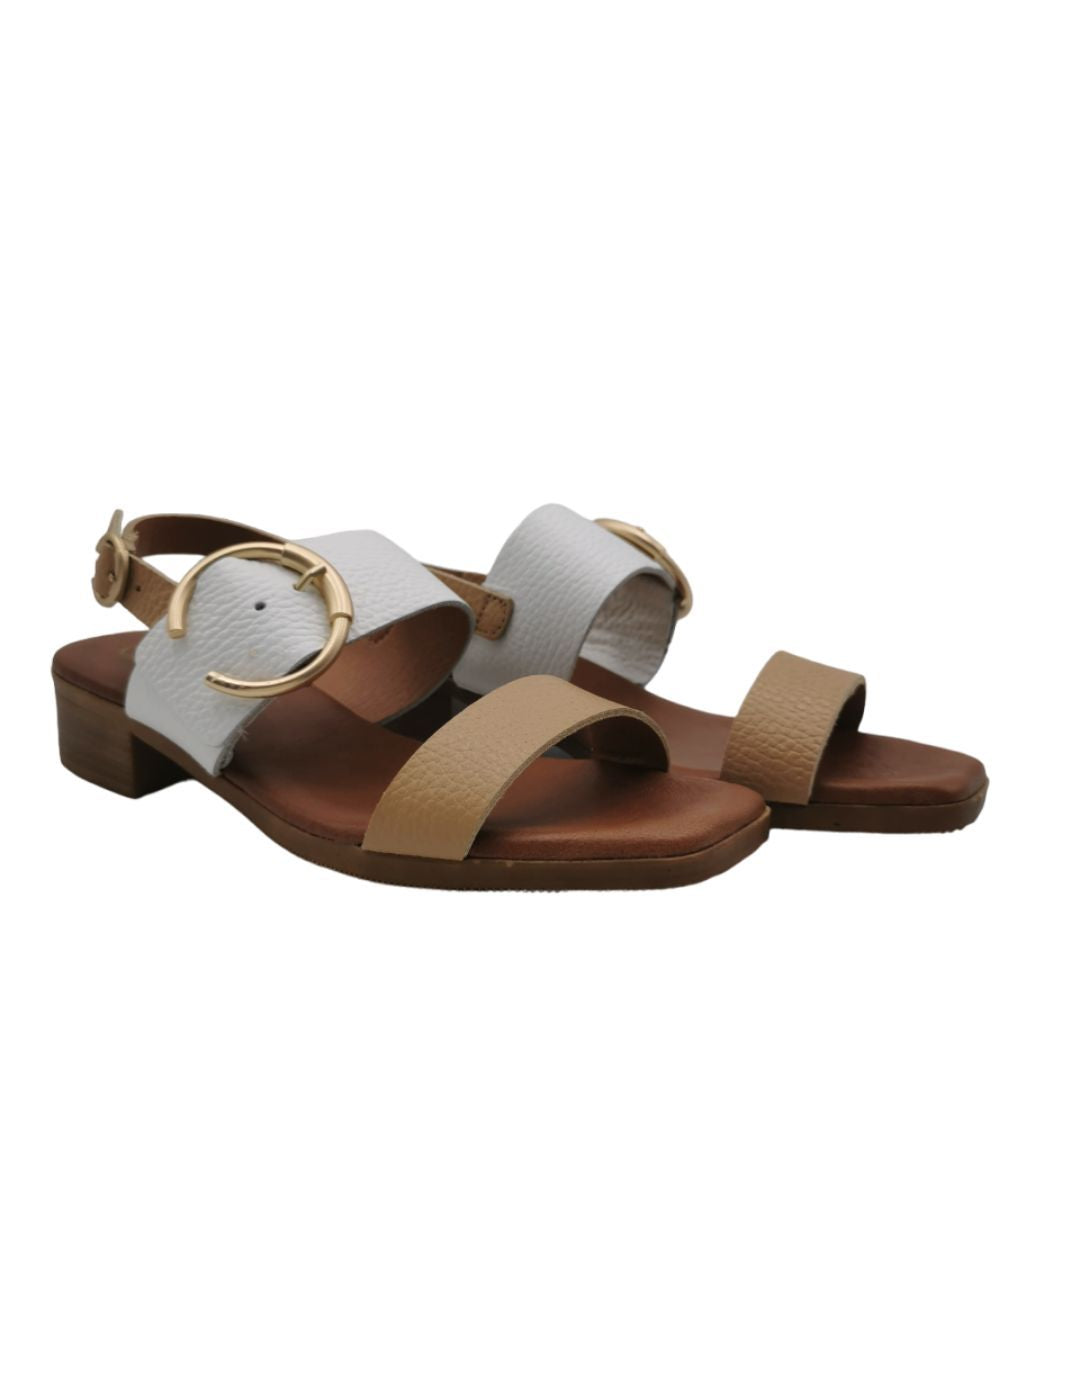 Oh my Sandals 5170 Beige